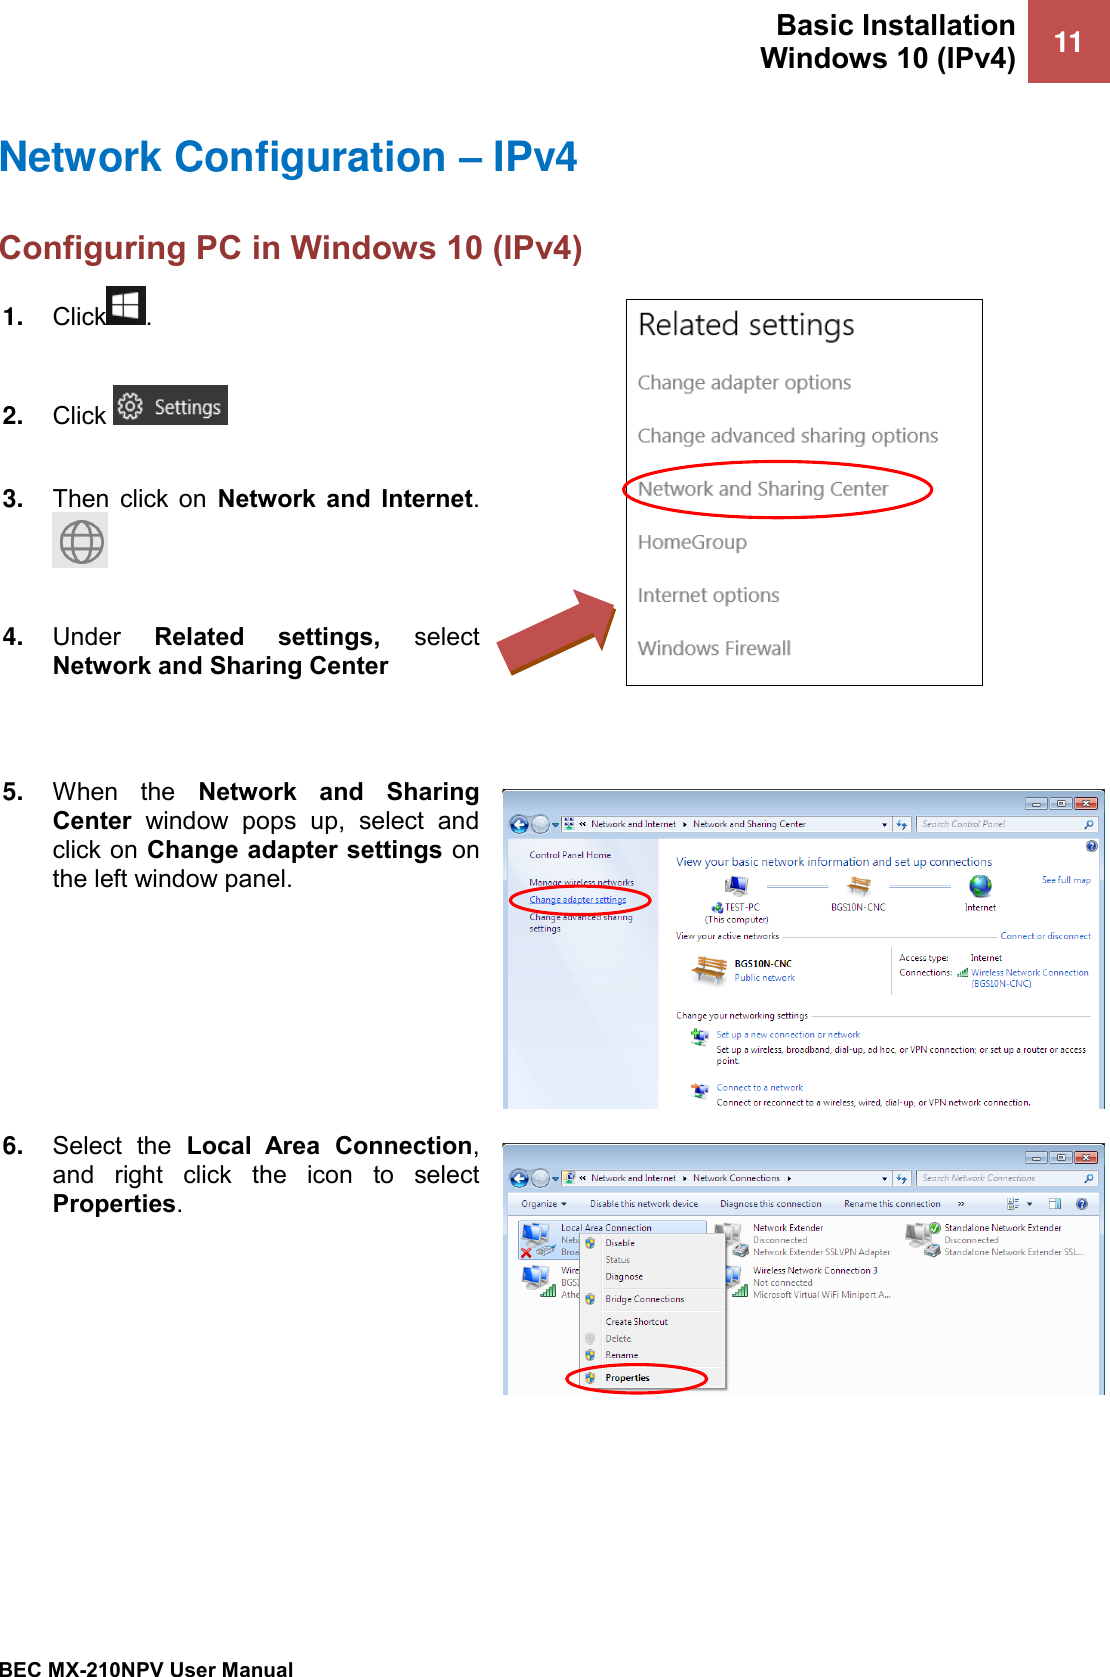 Basic Installation Windows 10 (IPv4) 11   BEC MX-210NPV User Manual  Network Configuration – IPv4 Configuring PC in Windows 10 (IPv4)    1. Click .  2. Click    3. Then  click  on  Network  and  Internet.   4. Under  Related  settings,  select Network and Sharing Center    5. When  the  Network  and  Sharing Center  window  pops  up,  select  and click on Change adapter settings on the left window panel.  6. Select  the  Local  Area  Connection, and  right  click  the  icon  to  select Properties.  